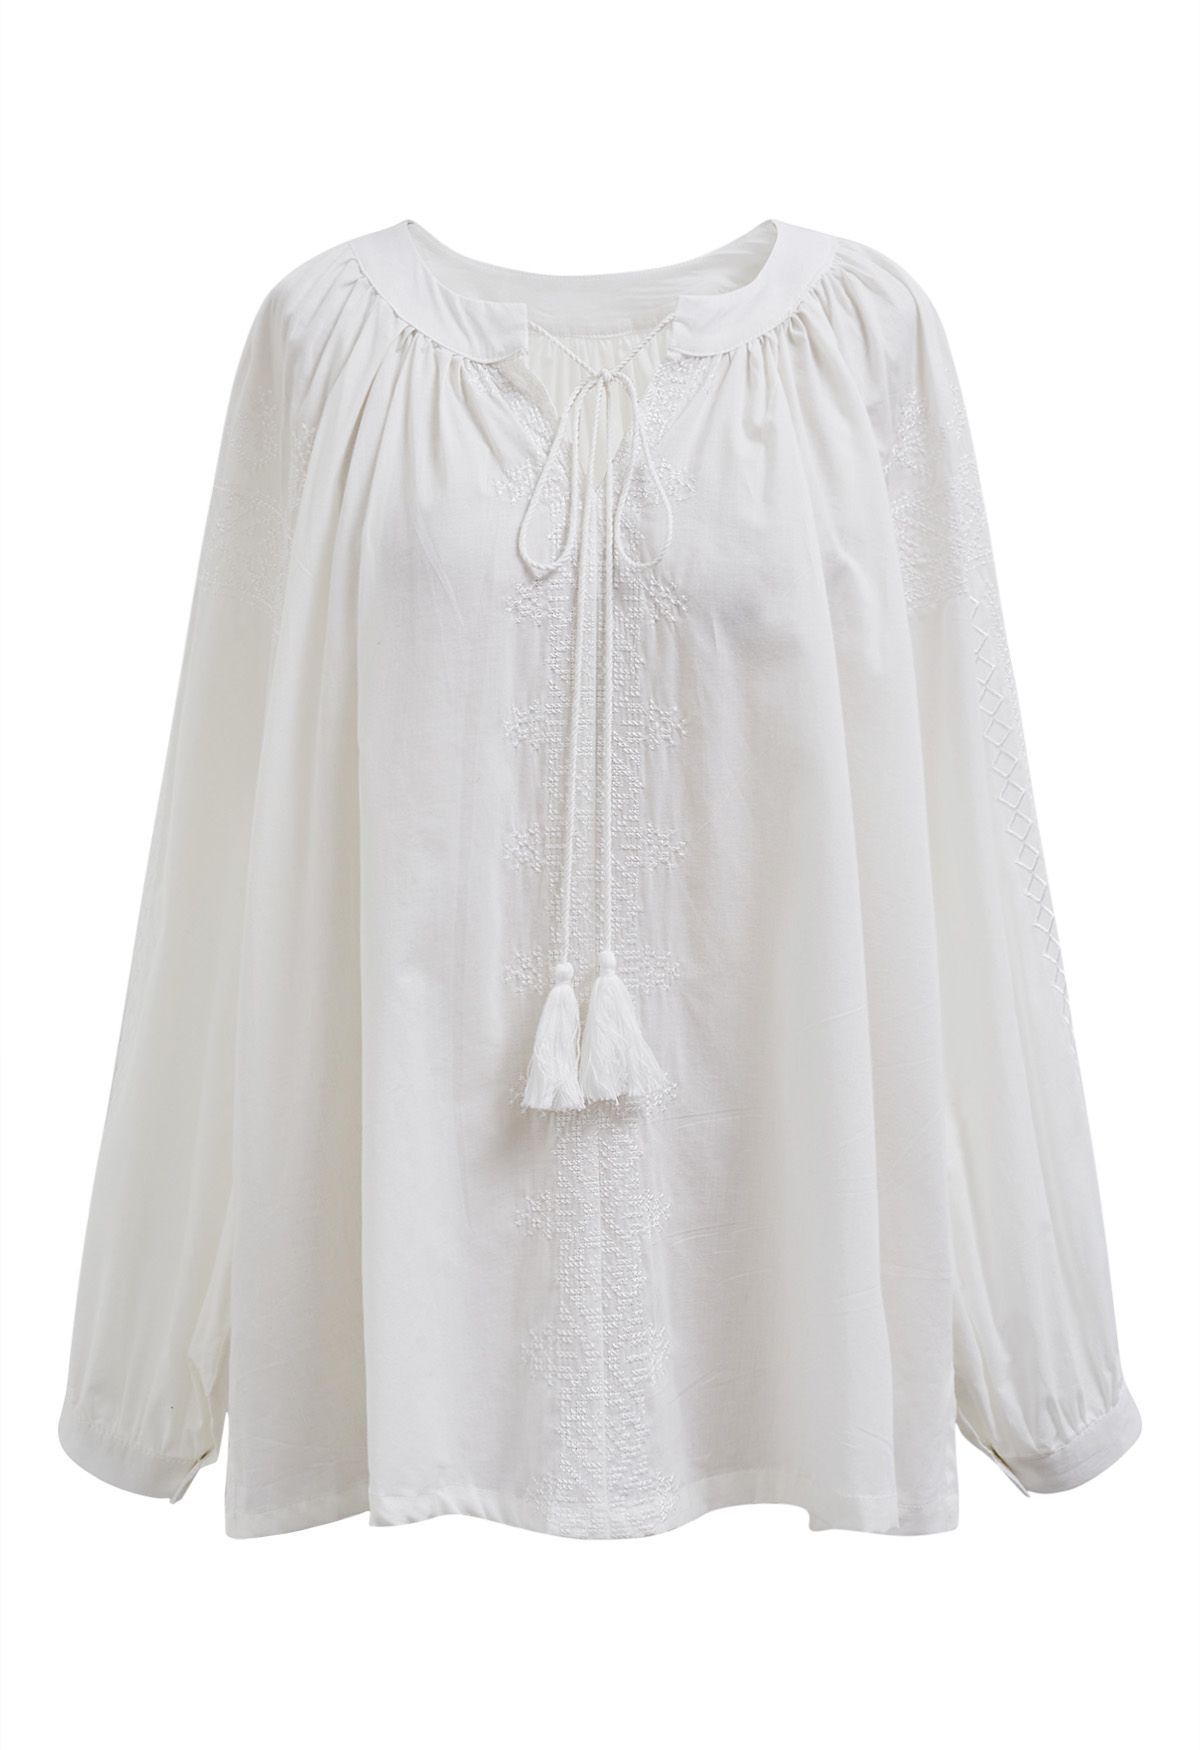 Tassel String Embroidered Cotton Top in White | Chicwish